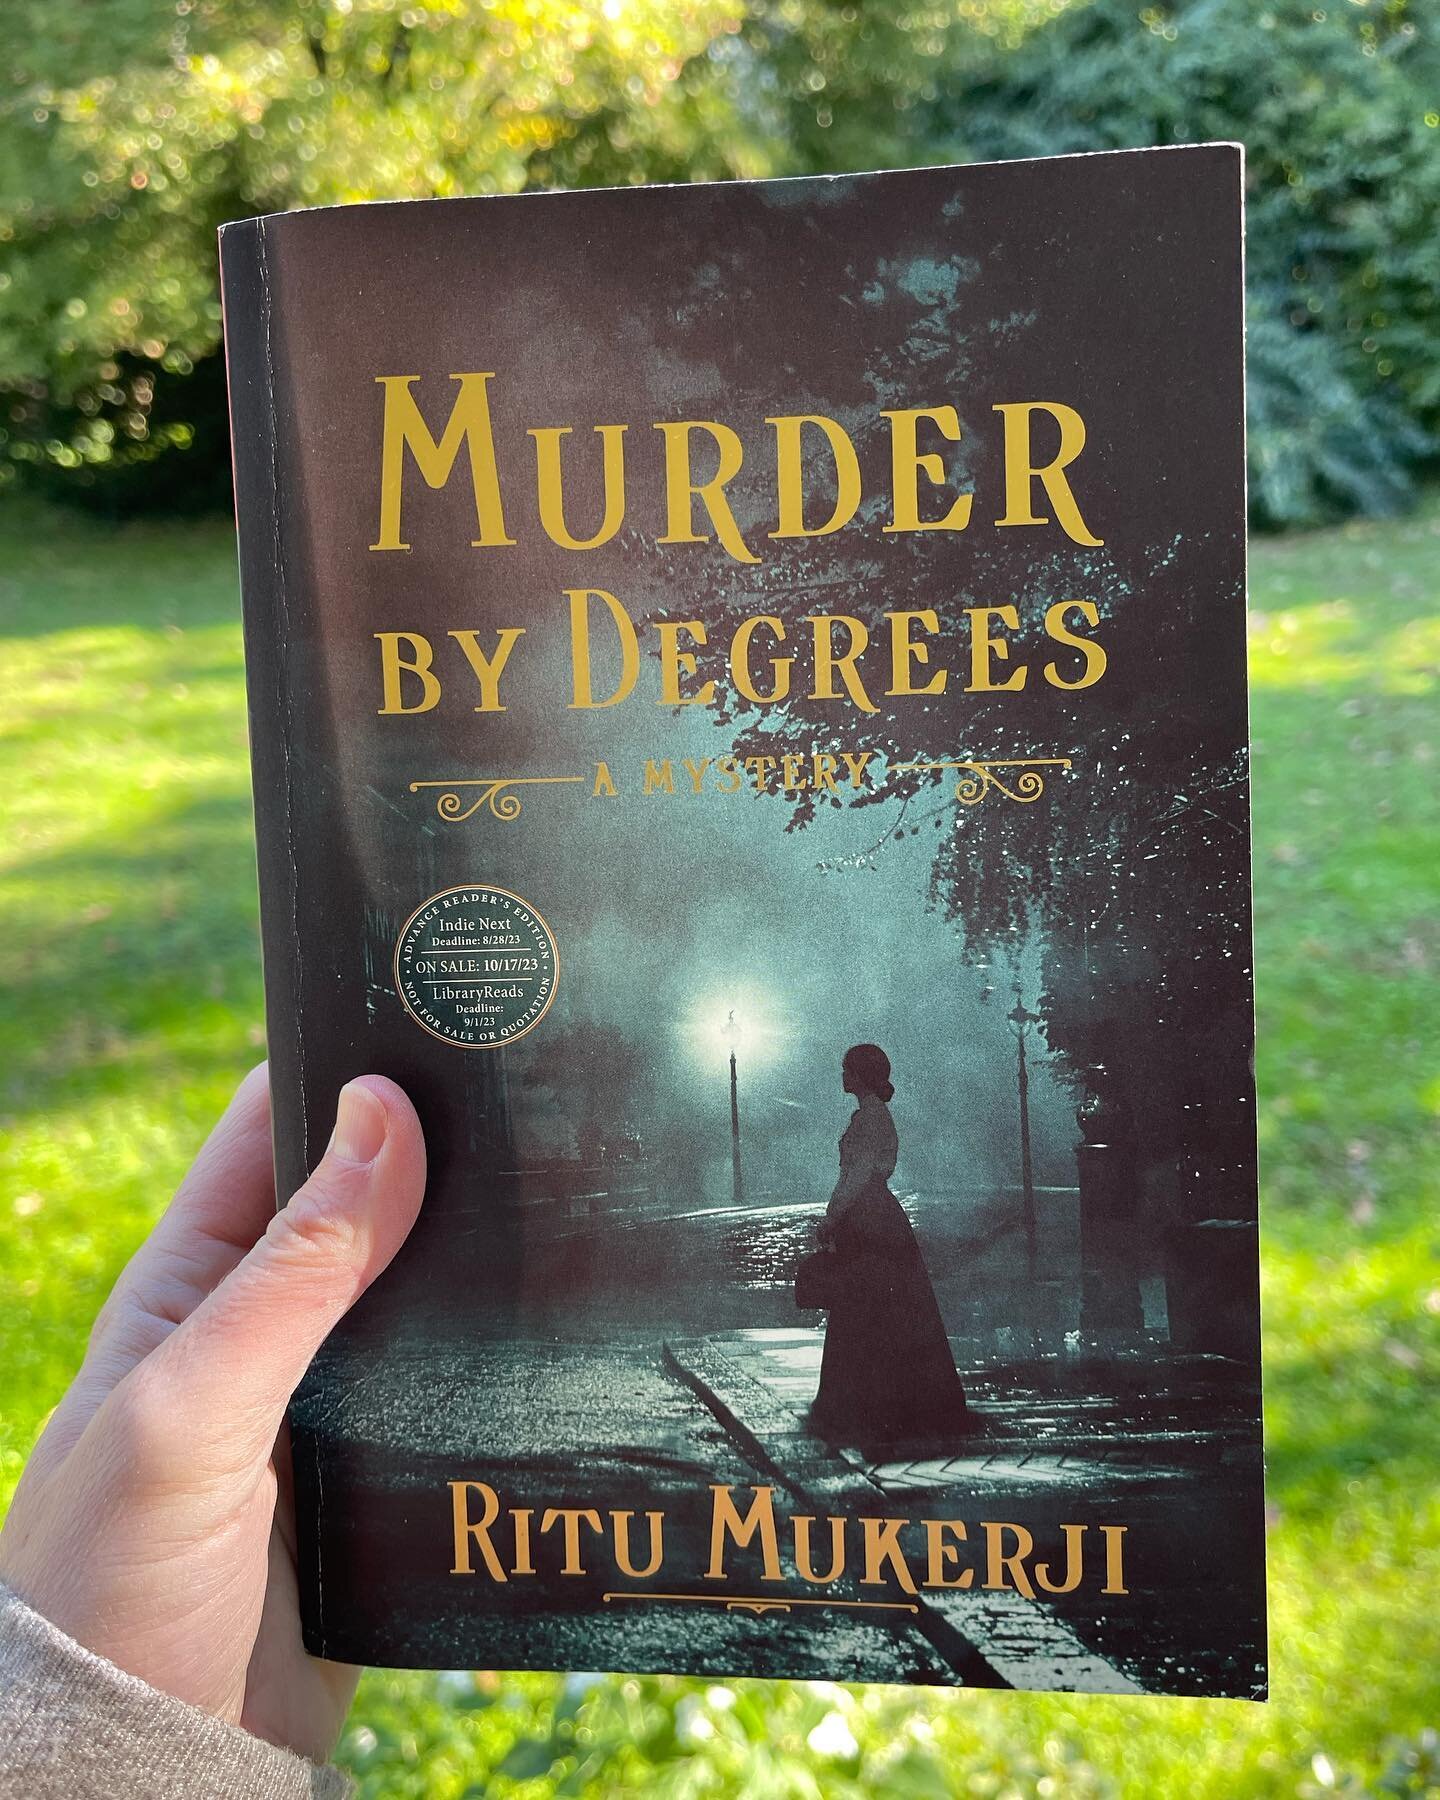 Can&rsquo;t wait to talk with @ritumukerji about her debut this Wednesday at @headhousebooks!! MURDER BY DEGREES comes out tomorrow, and it&rsquo;s such a fun, atmospheric mystery.  Ritu&rsquo;s depiction of nineteenth-century Philadelphia is so vivi